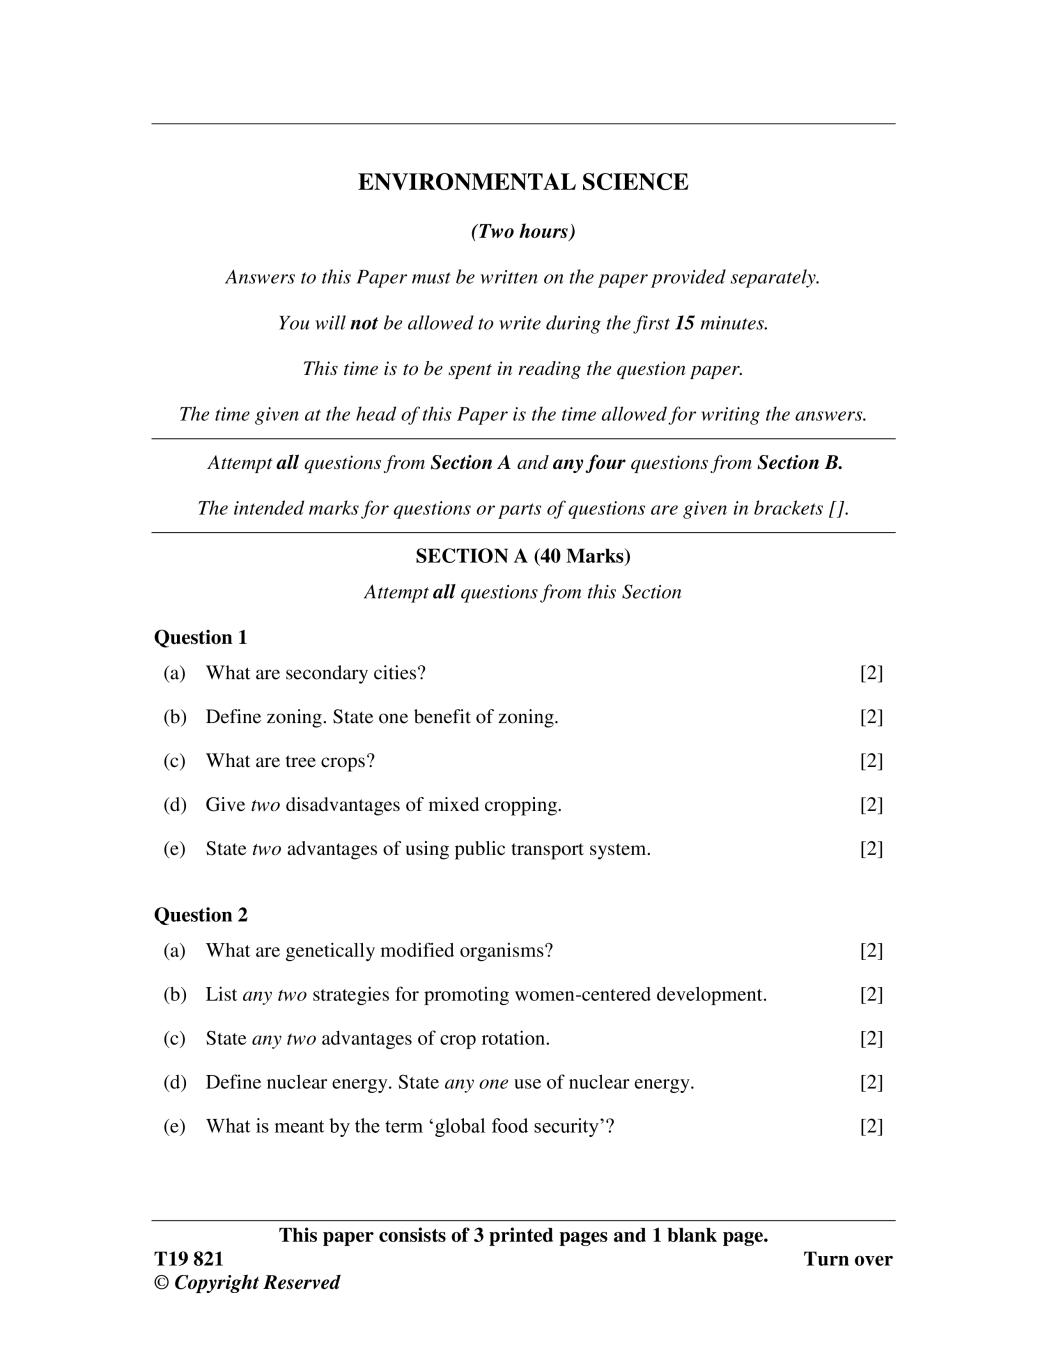 ICSE Class 10 Question Paper 2019 for Environmental Science  - Page 1